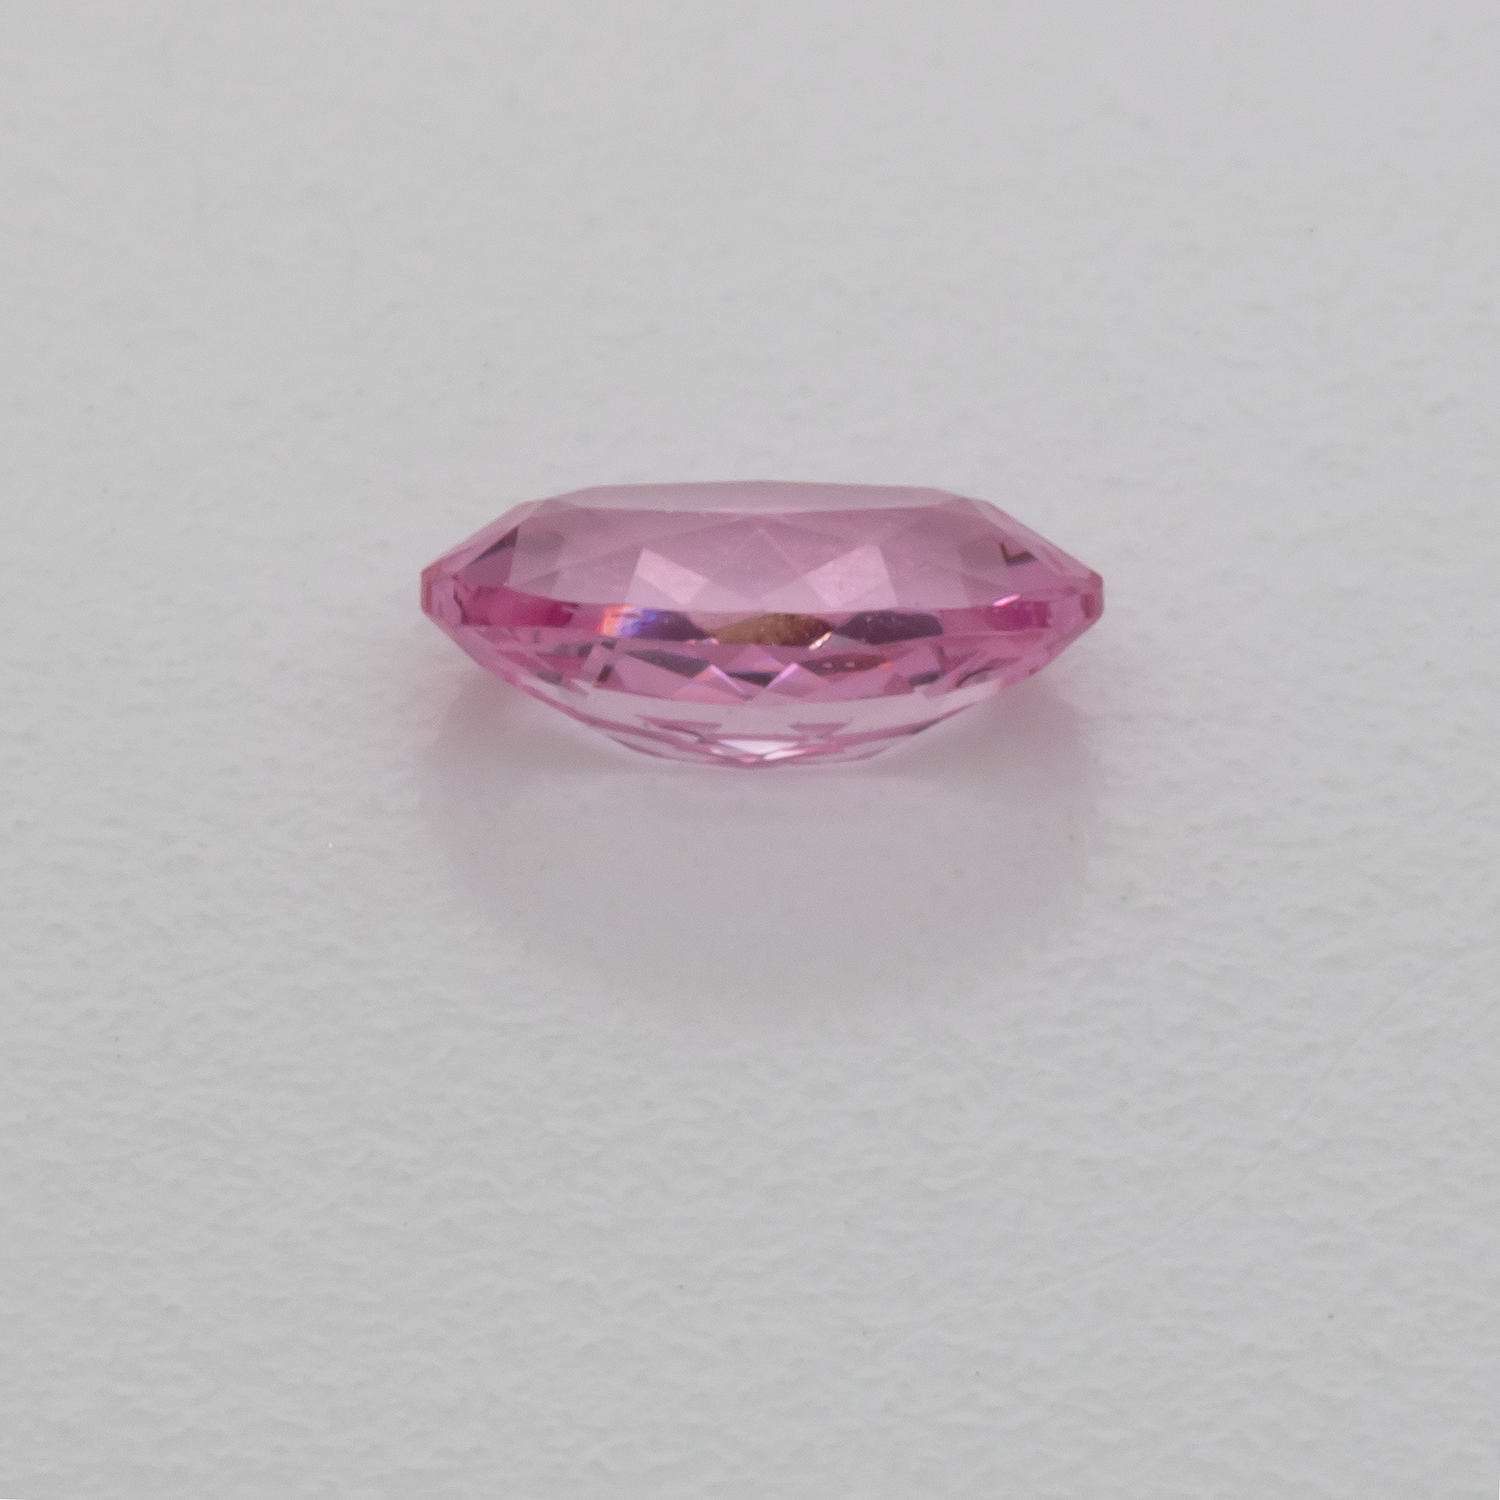 Spinell - rosa, oval, 5x3 mm, 0,25 cts, Nr. SP90026